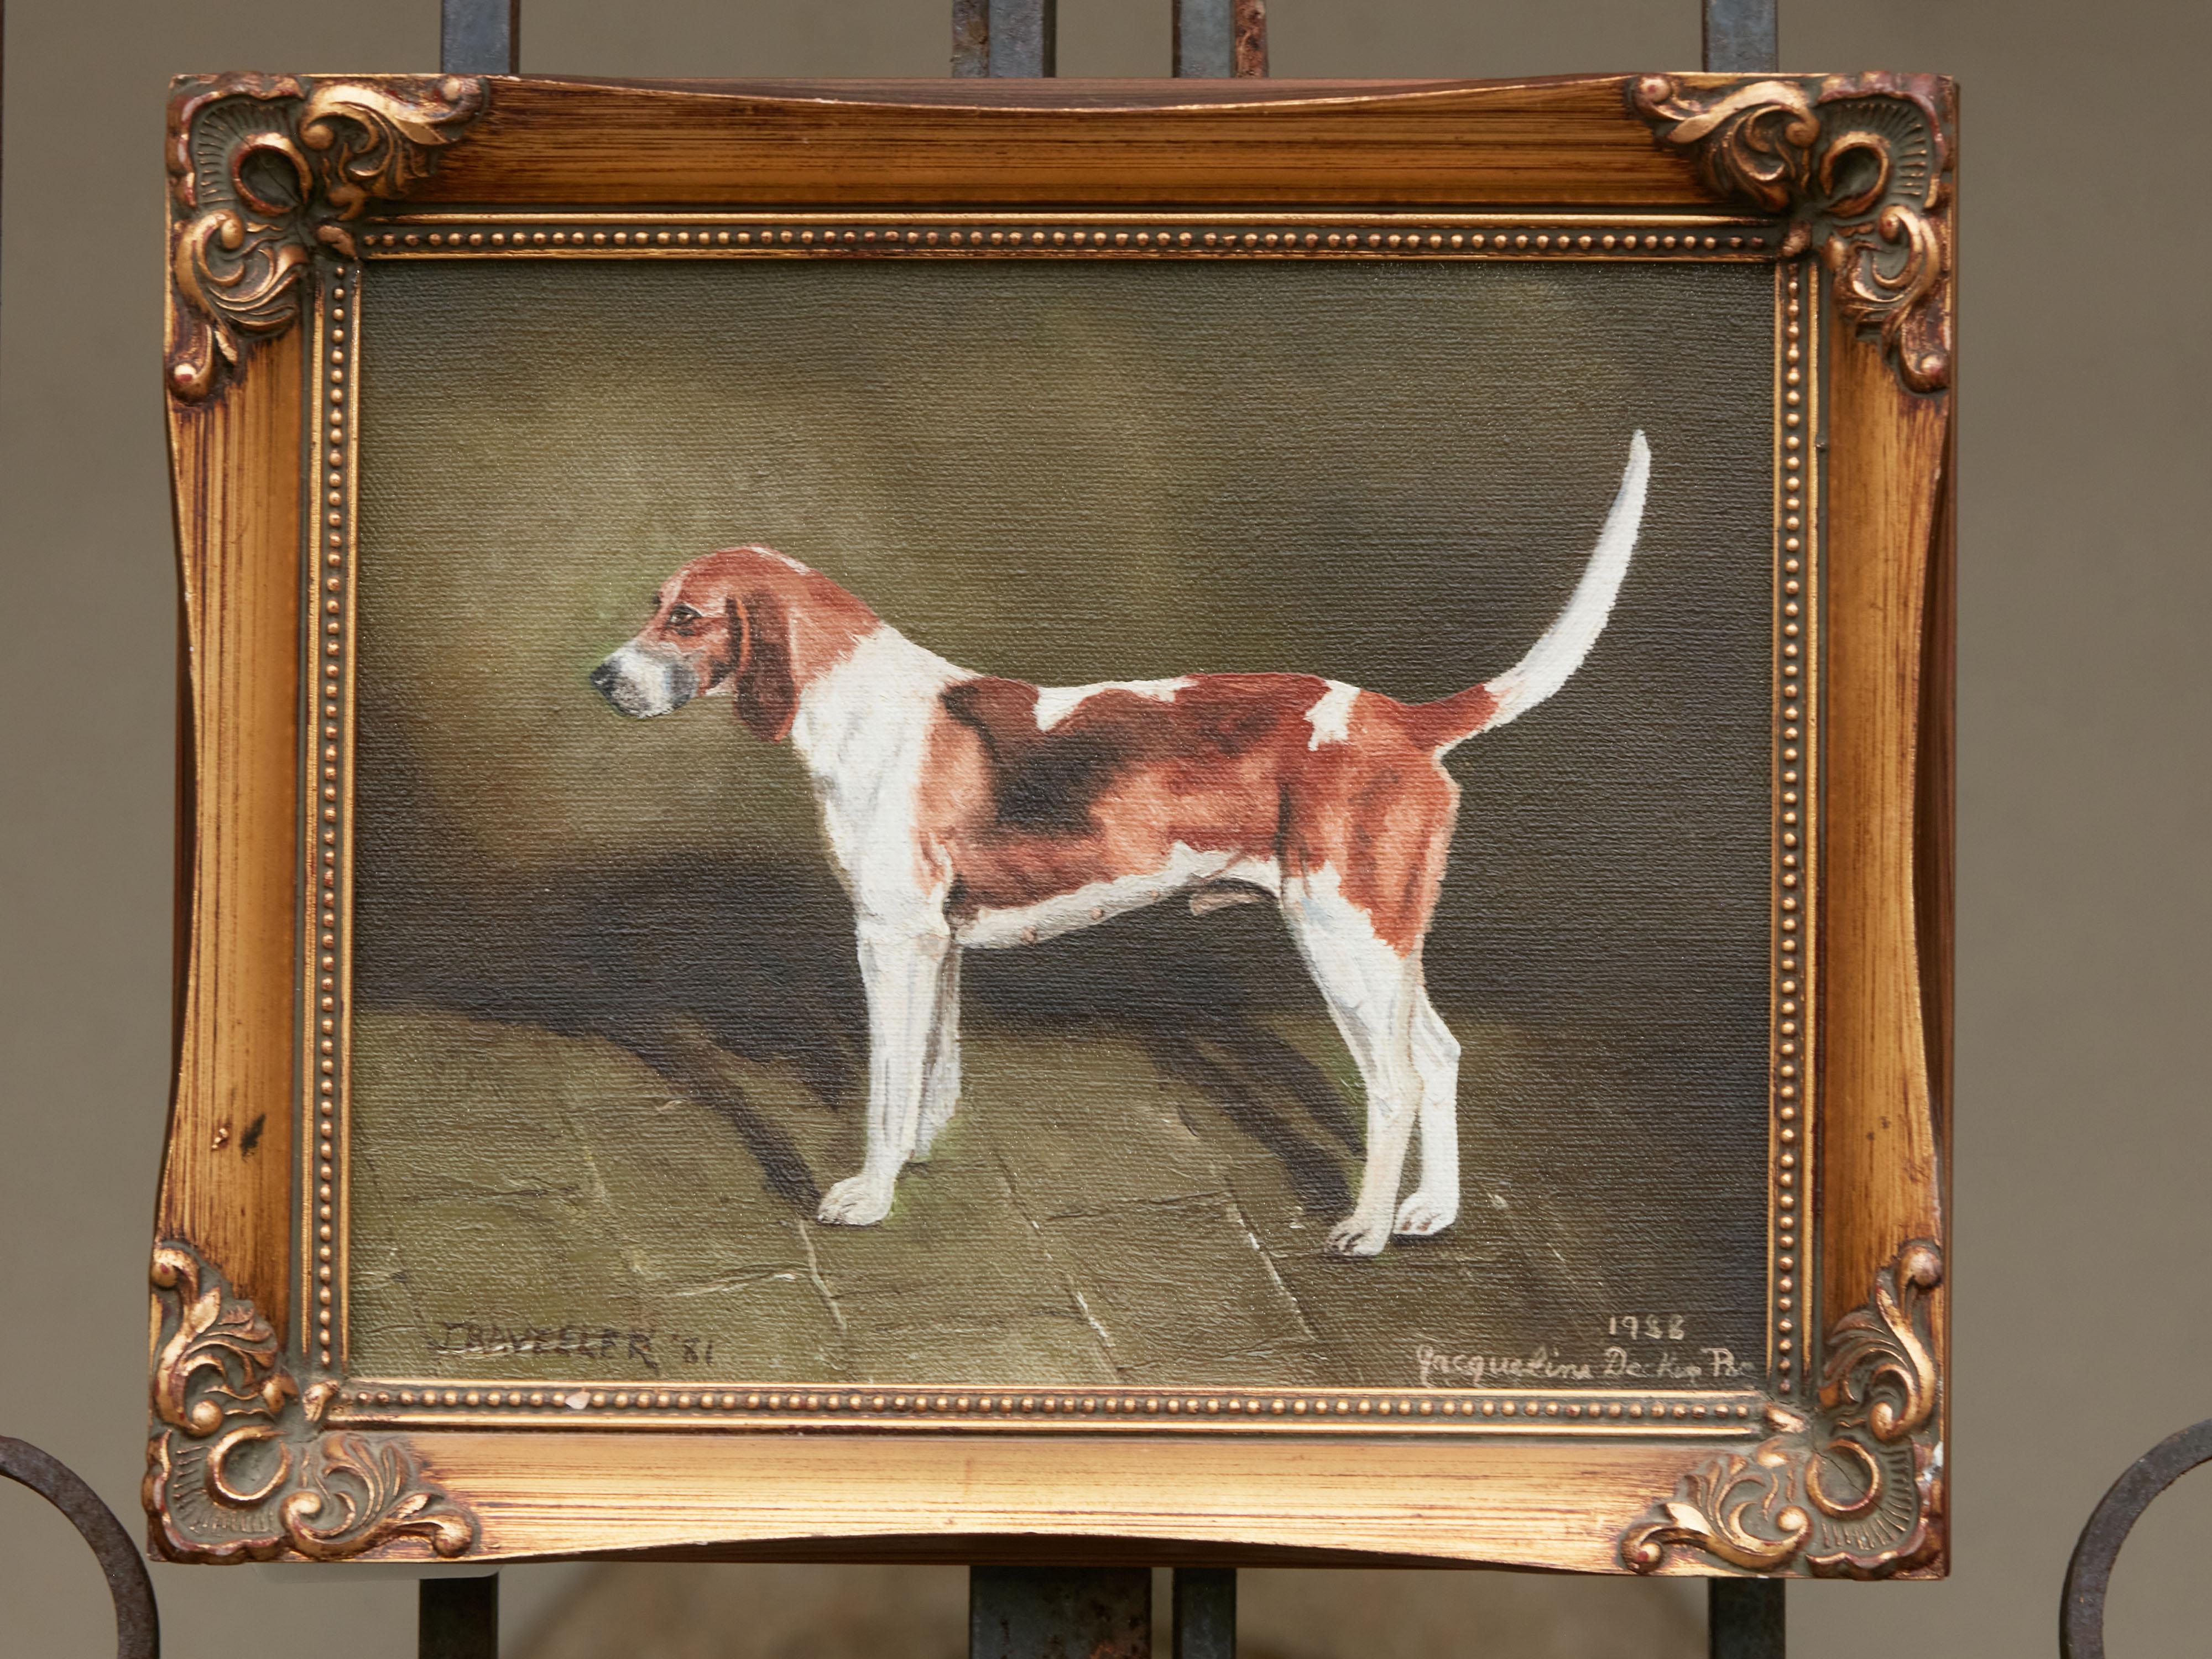 Oil on Canvas Dog Painting Depicting a Belvoir Hound, Signed Jacqueline Decker 1